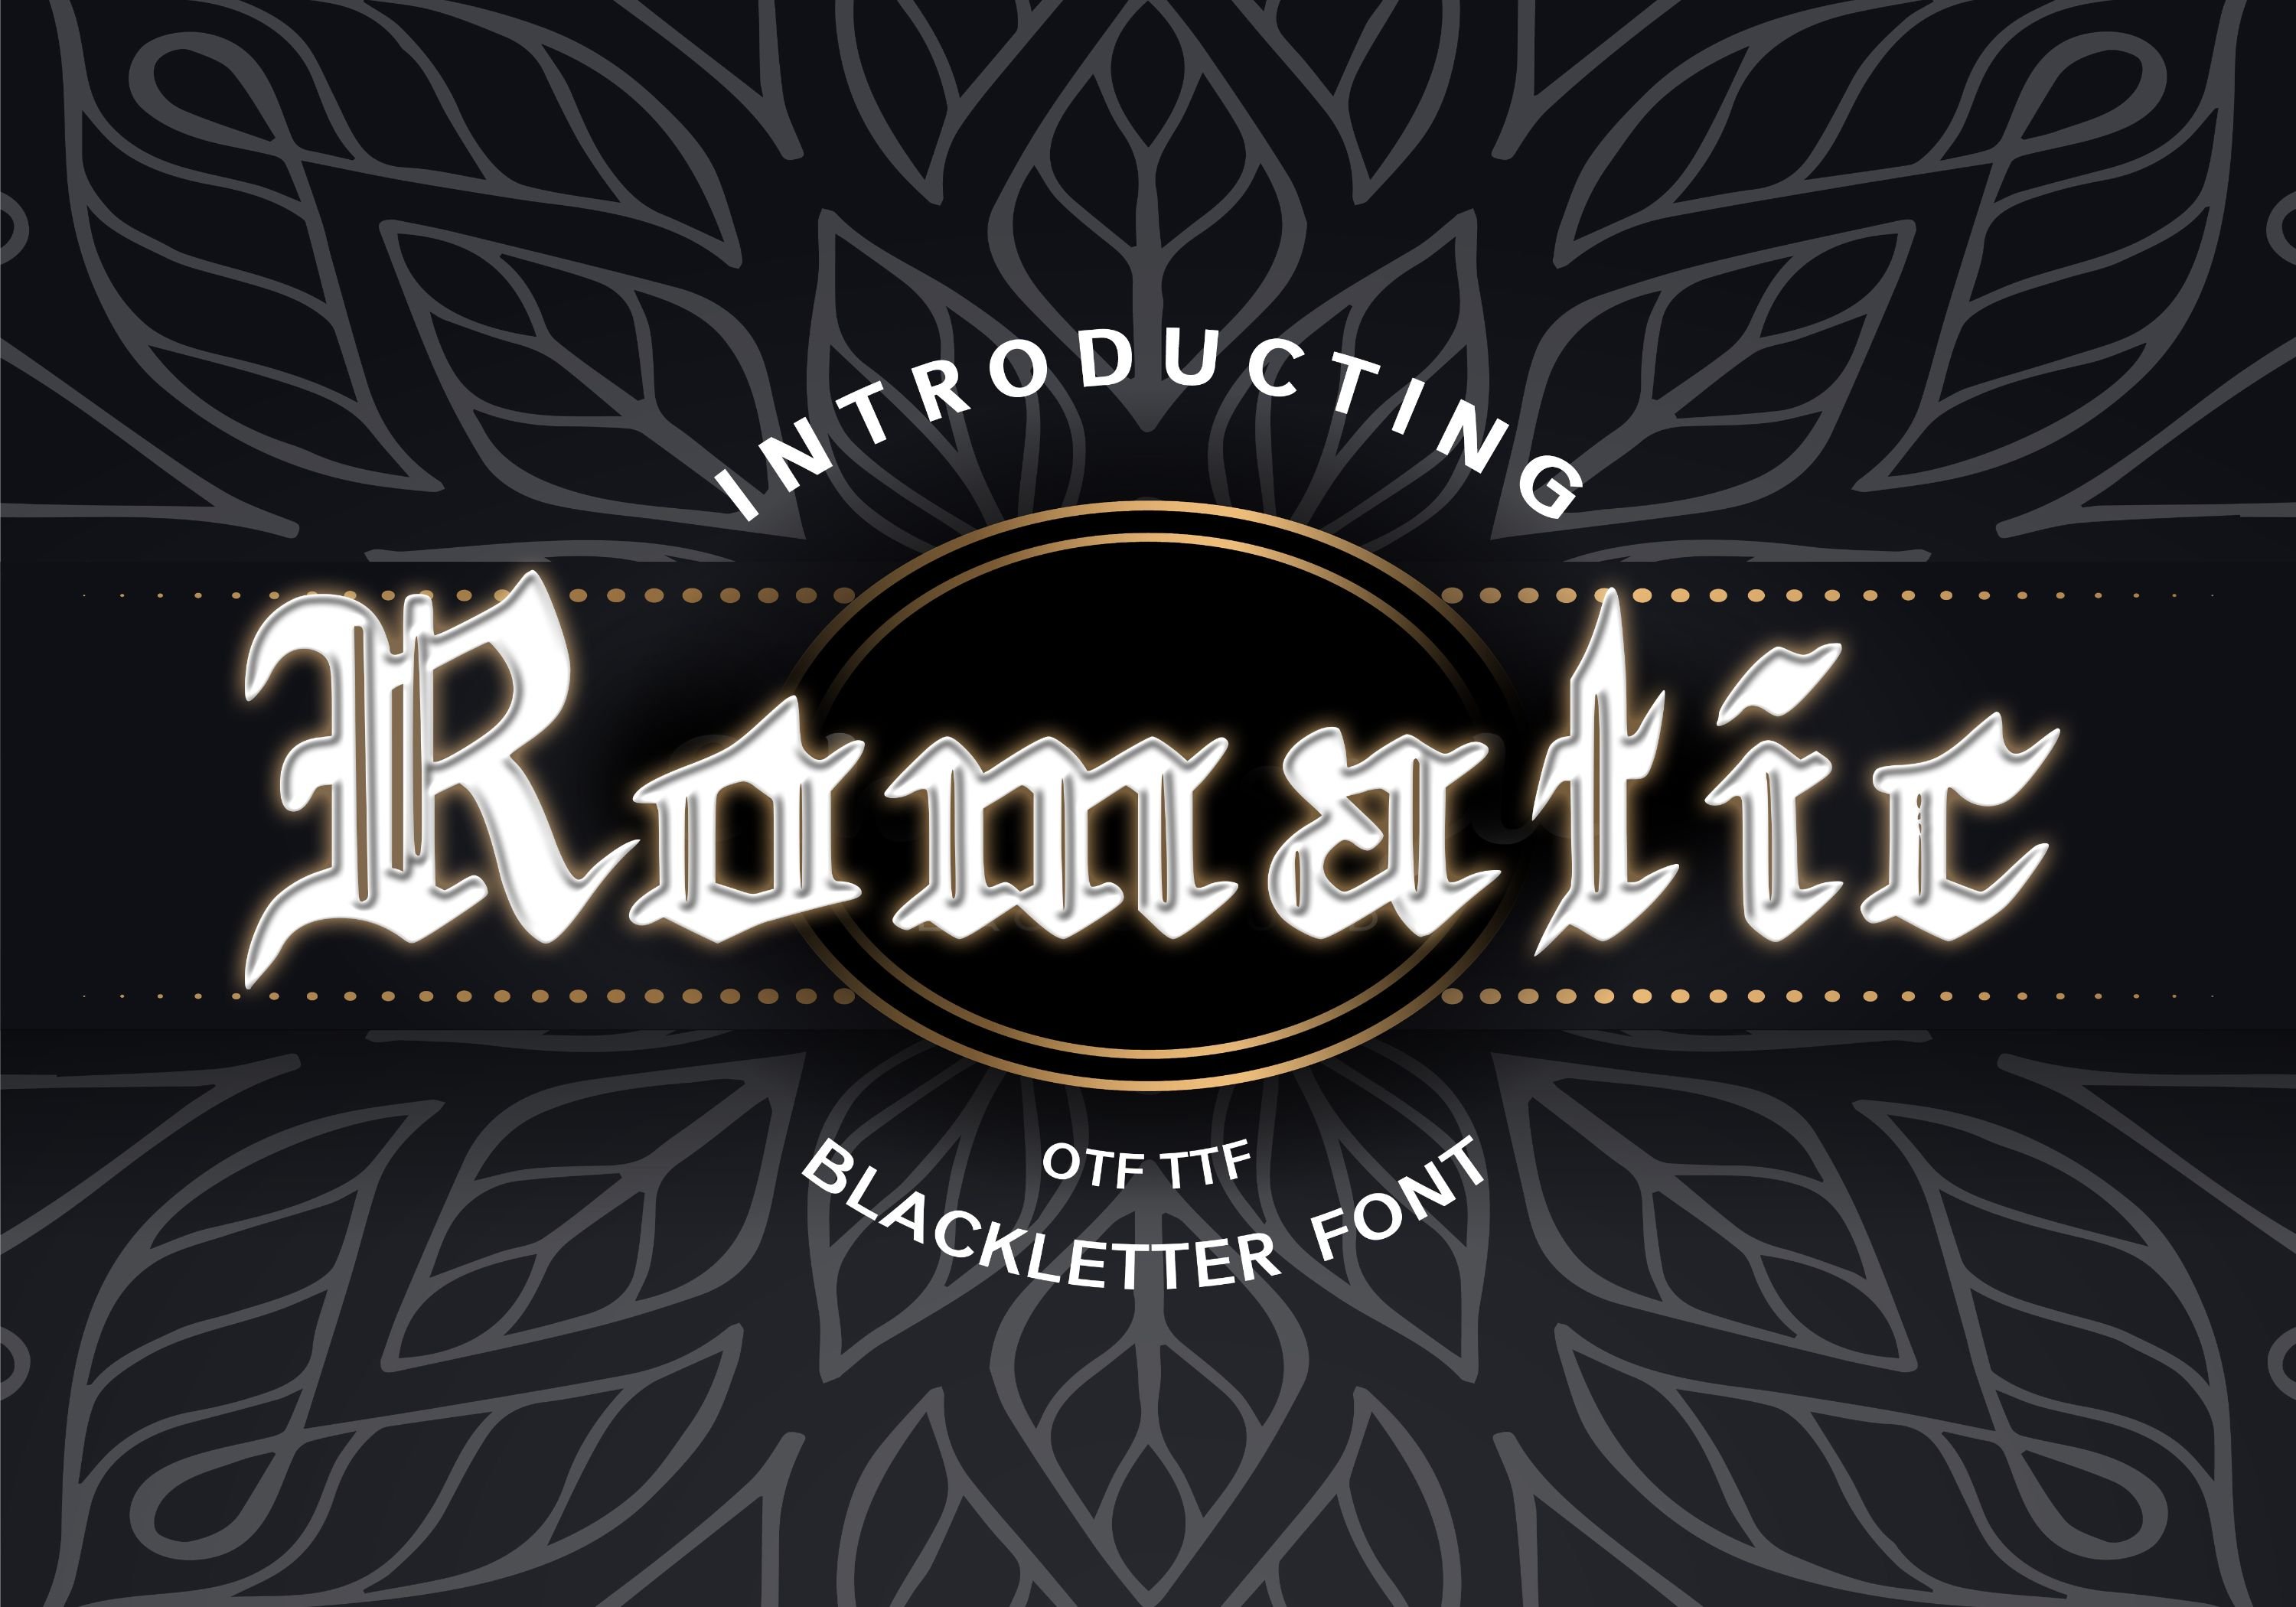 Romatic Blackletter Font cover image.